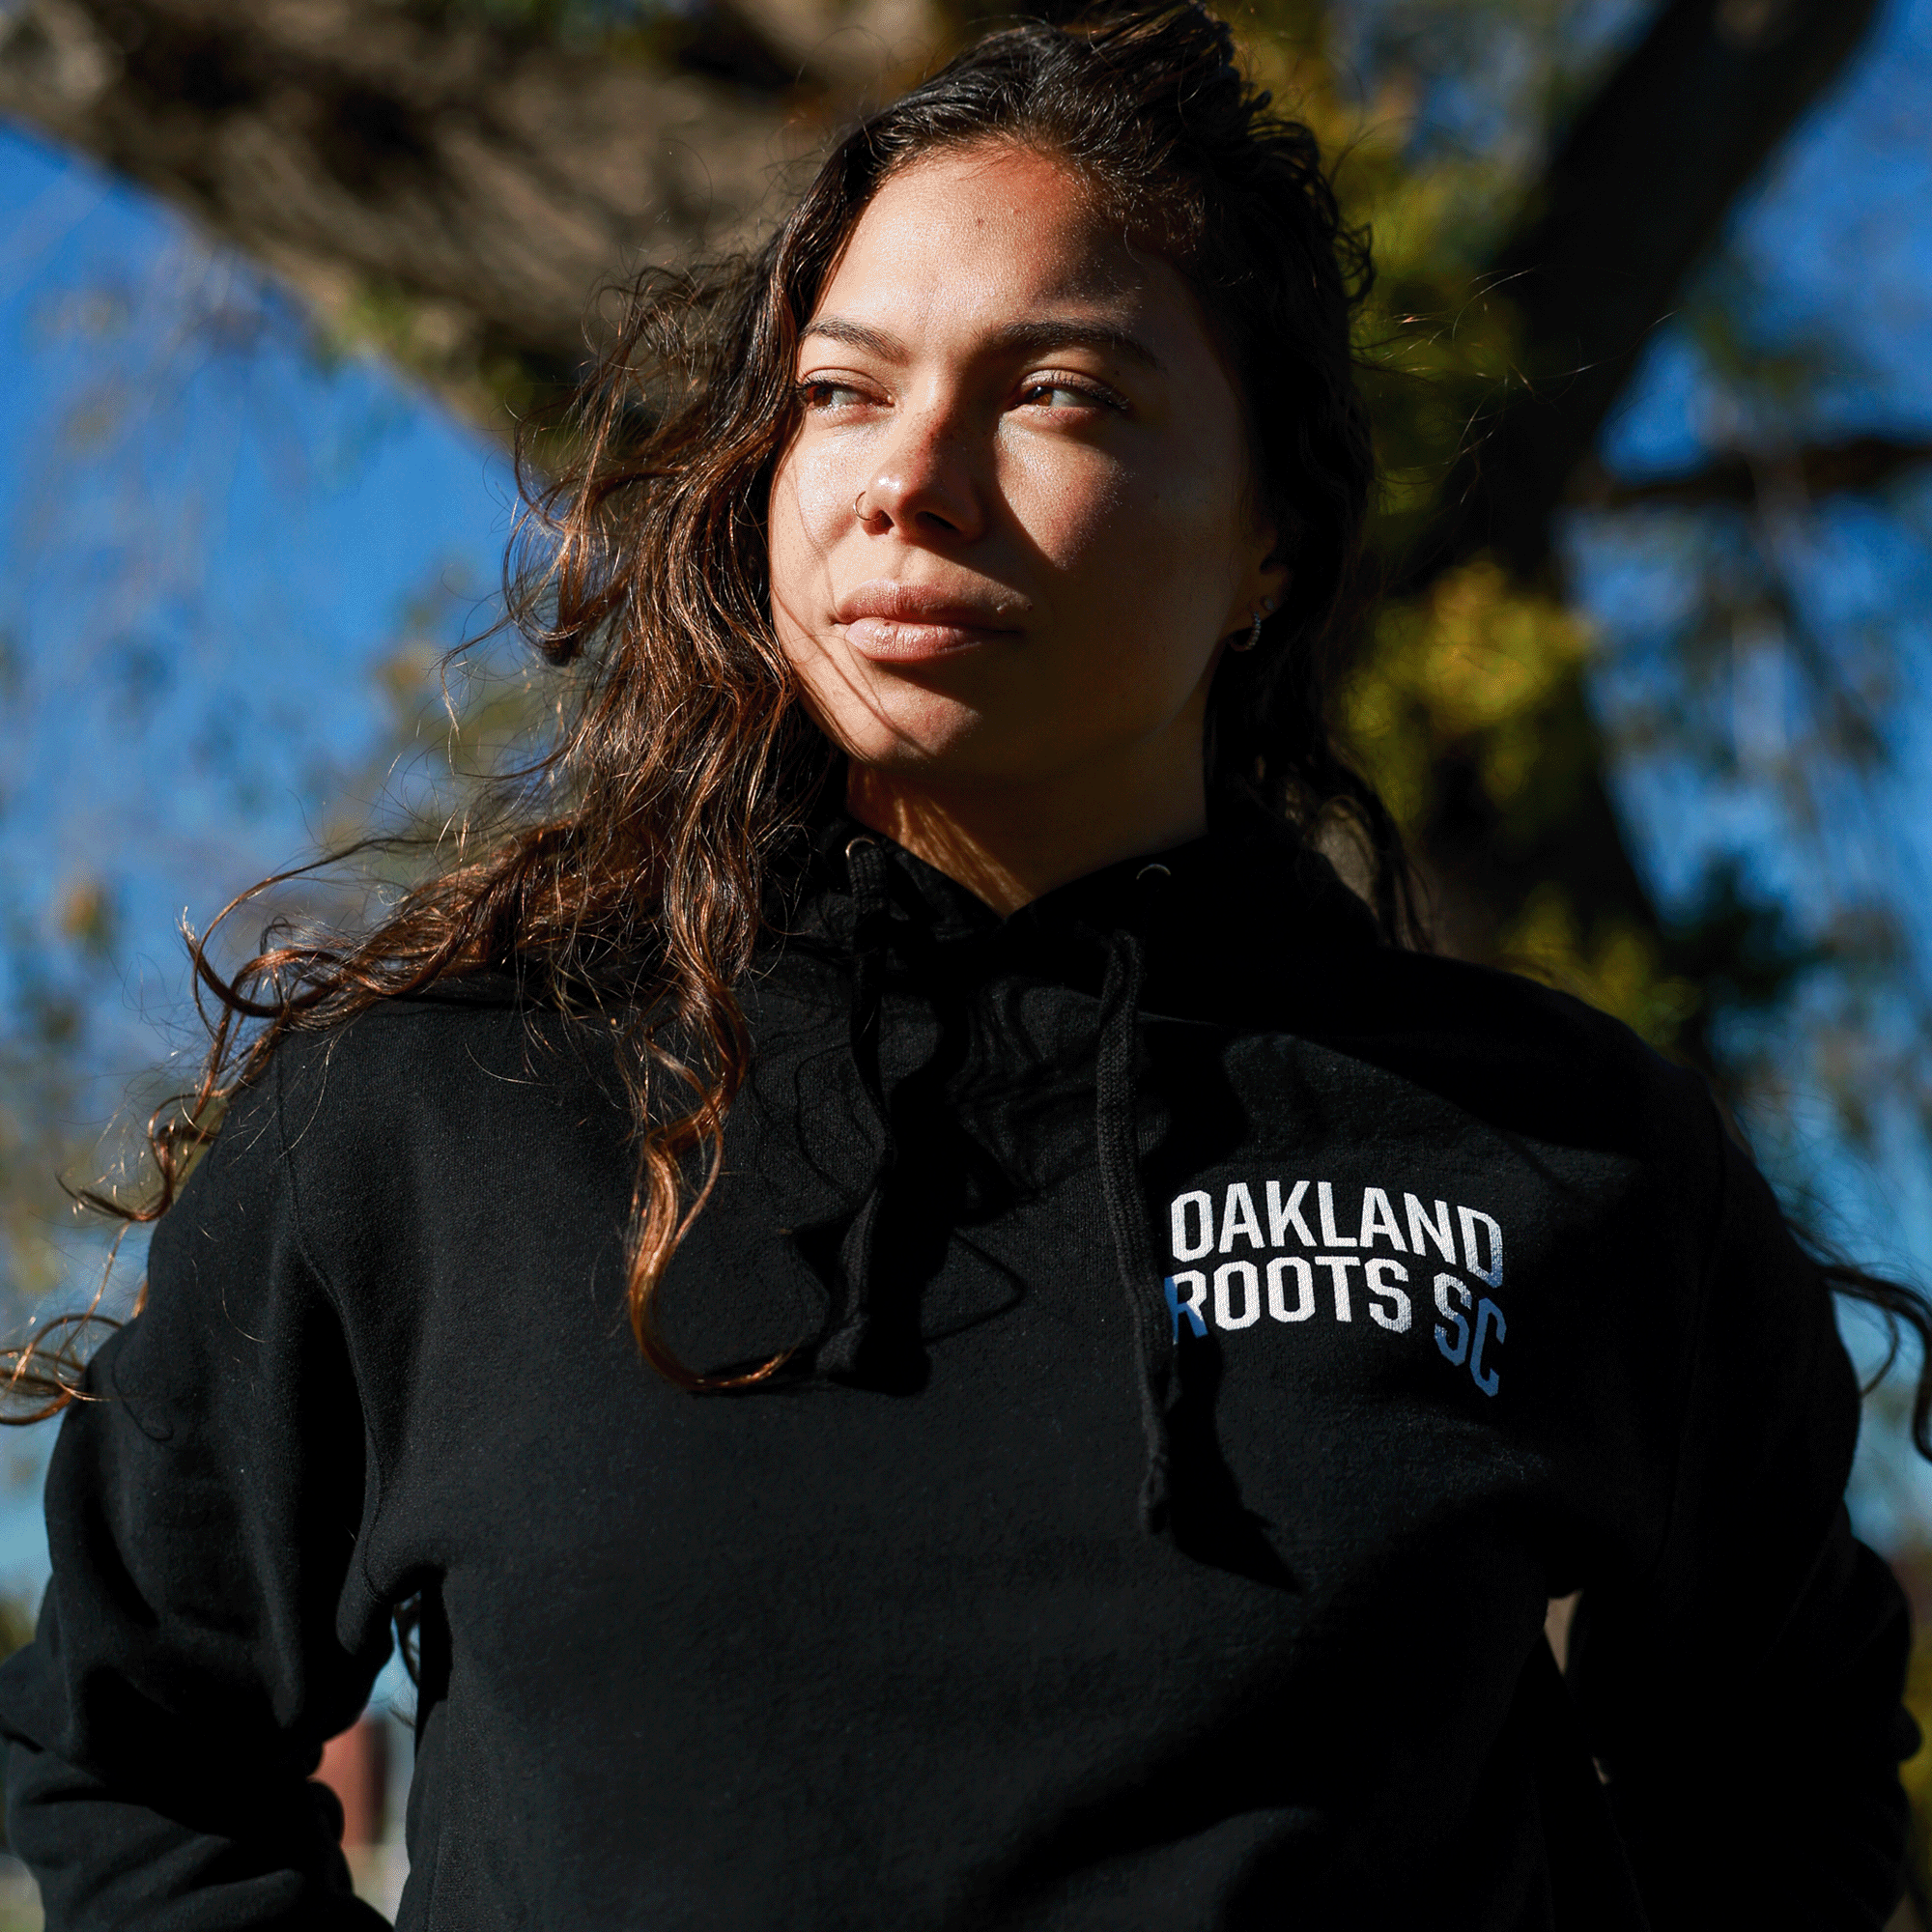 Model wearing black pullover hoodie with white OAKLAND ROOTS SC wordmark on the chest.